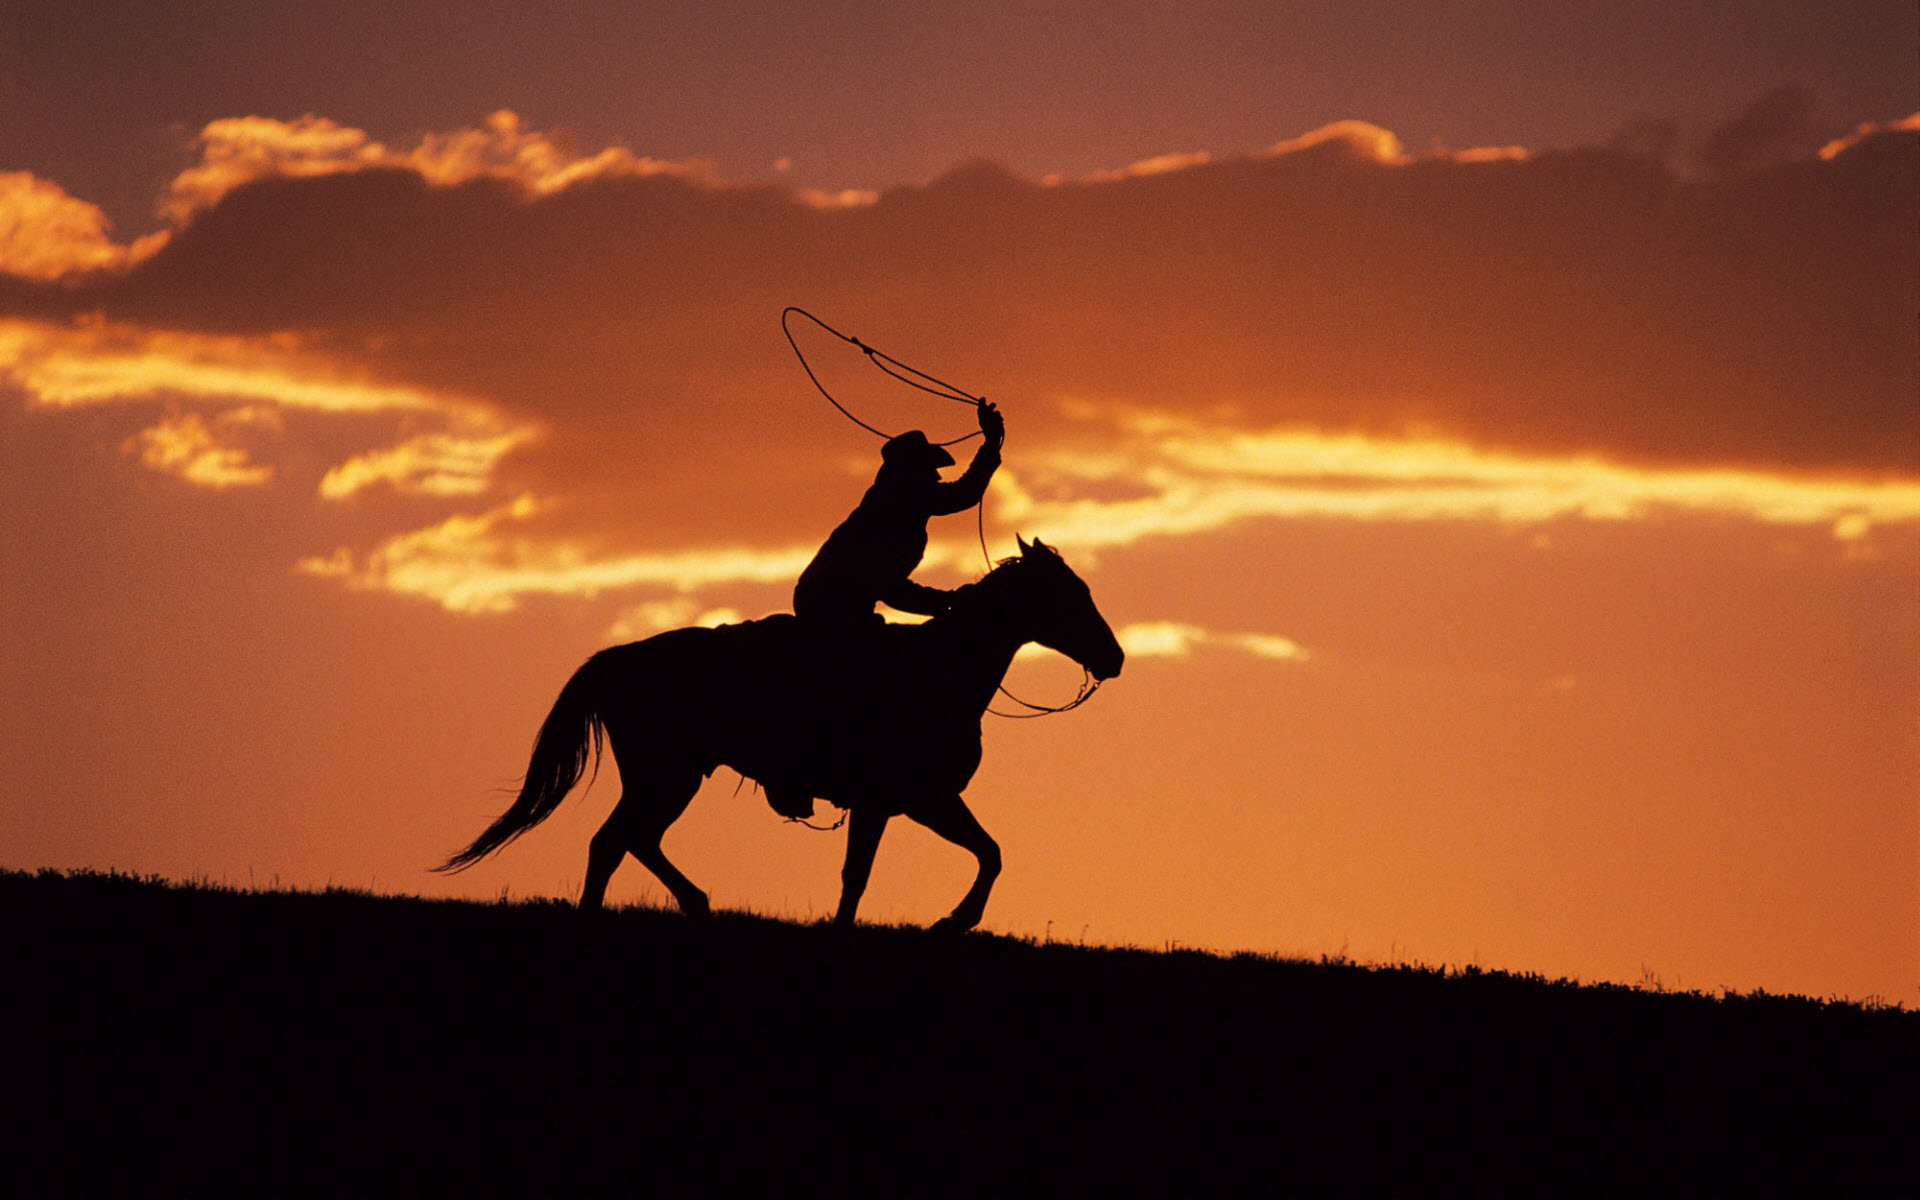 Wallpaper Includes a Western Cowboy at Sunset Free in Running